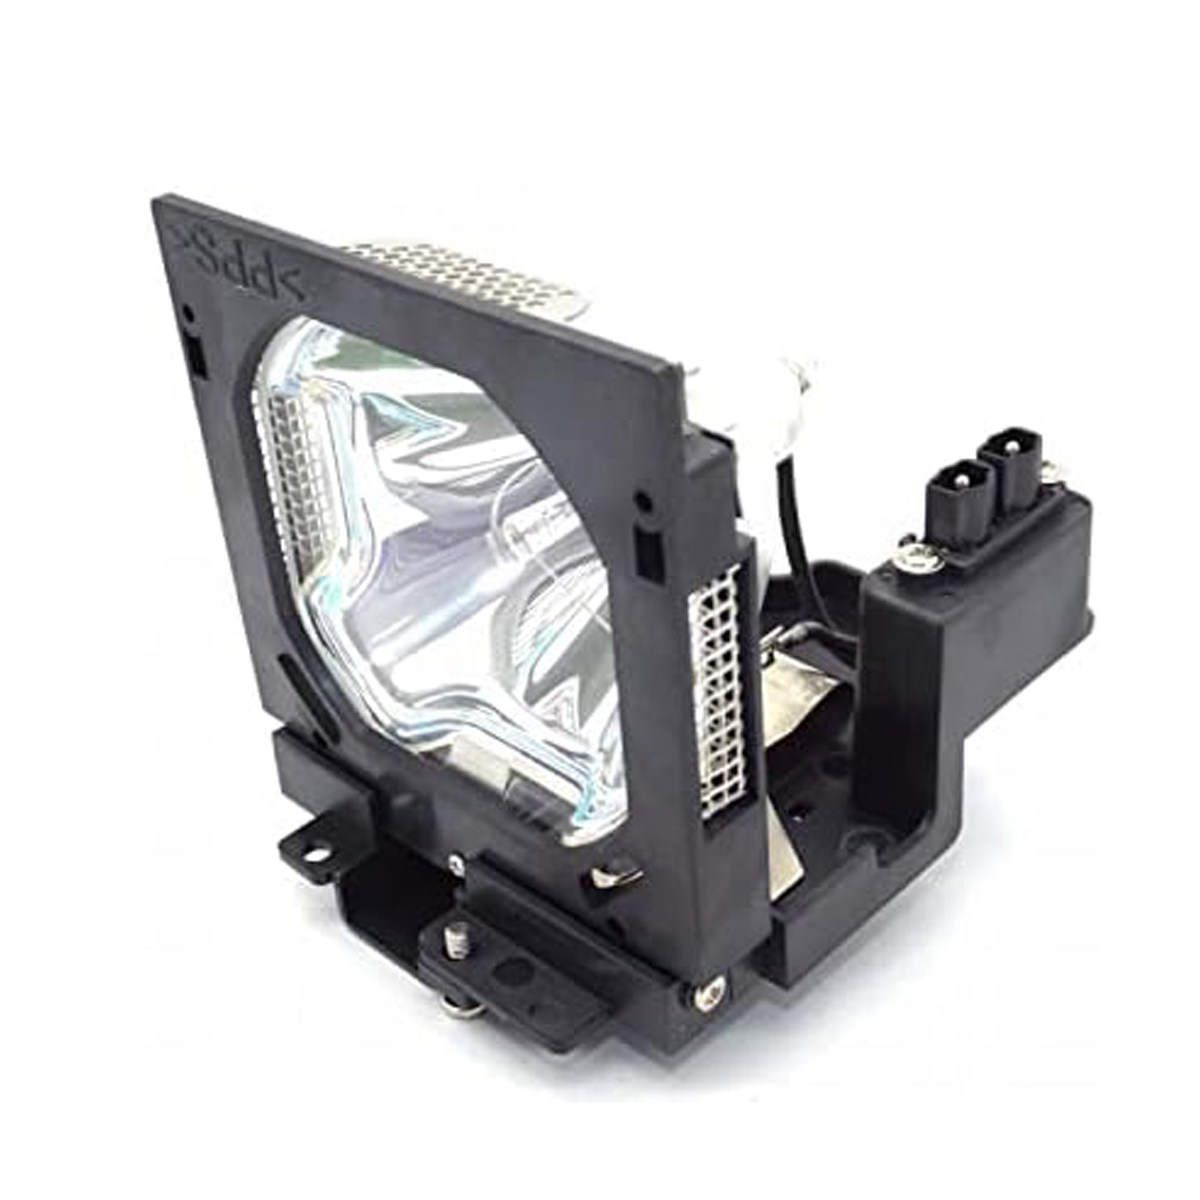 Replacement Projector lamp SP-LAMP-004 For Infocus Projector